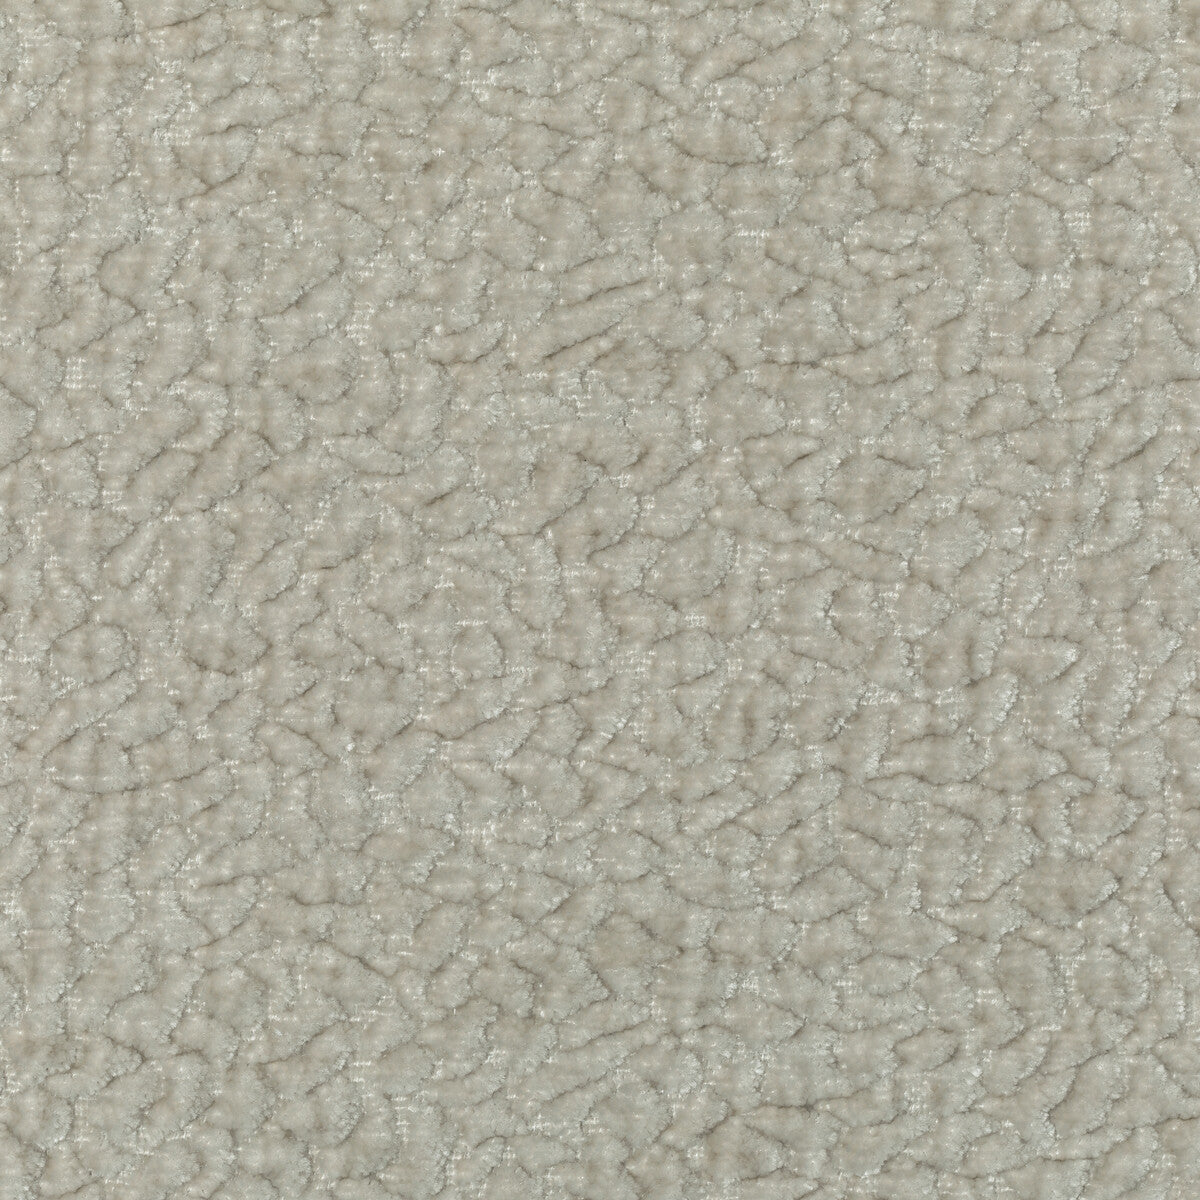 Kravet Couture fabric in 36596-111 color - pattern 36596.111.0 - by Kravet Couture in the Mabley Handler collection